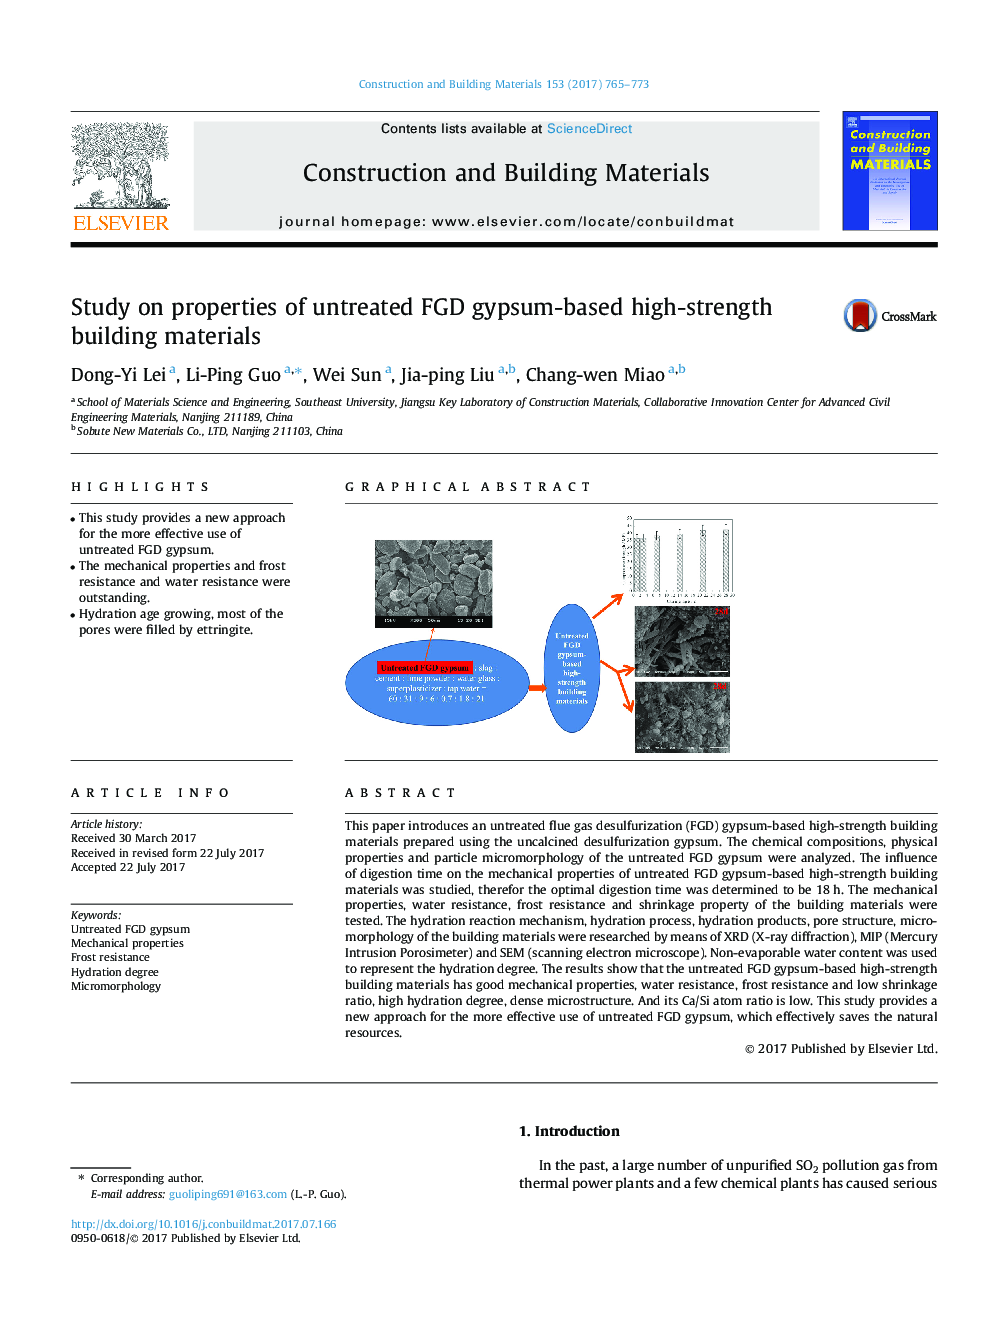 Study on properties of untreated FGD gypsum-based high-strength building materials